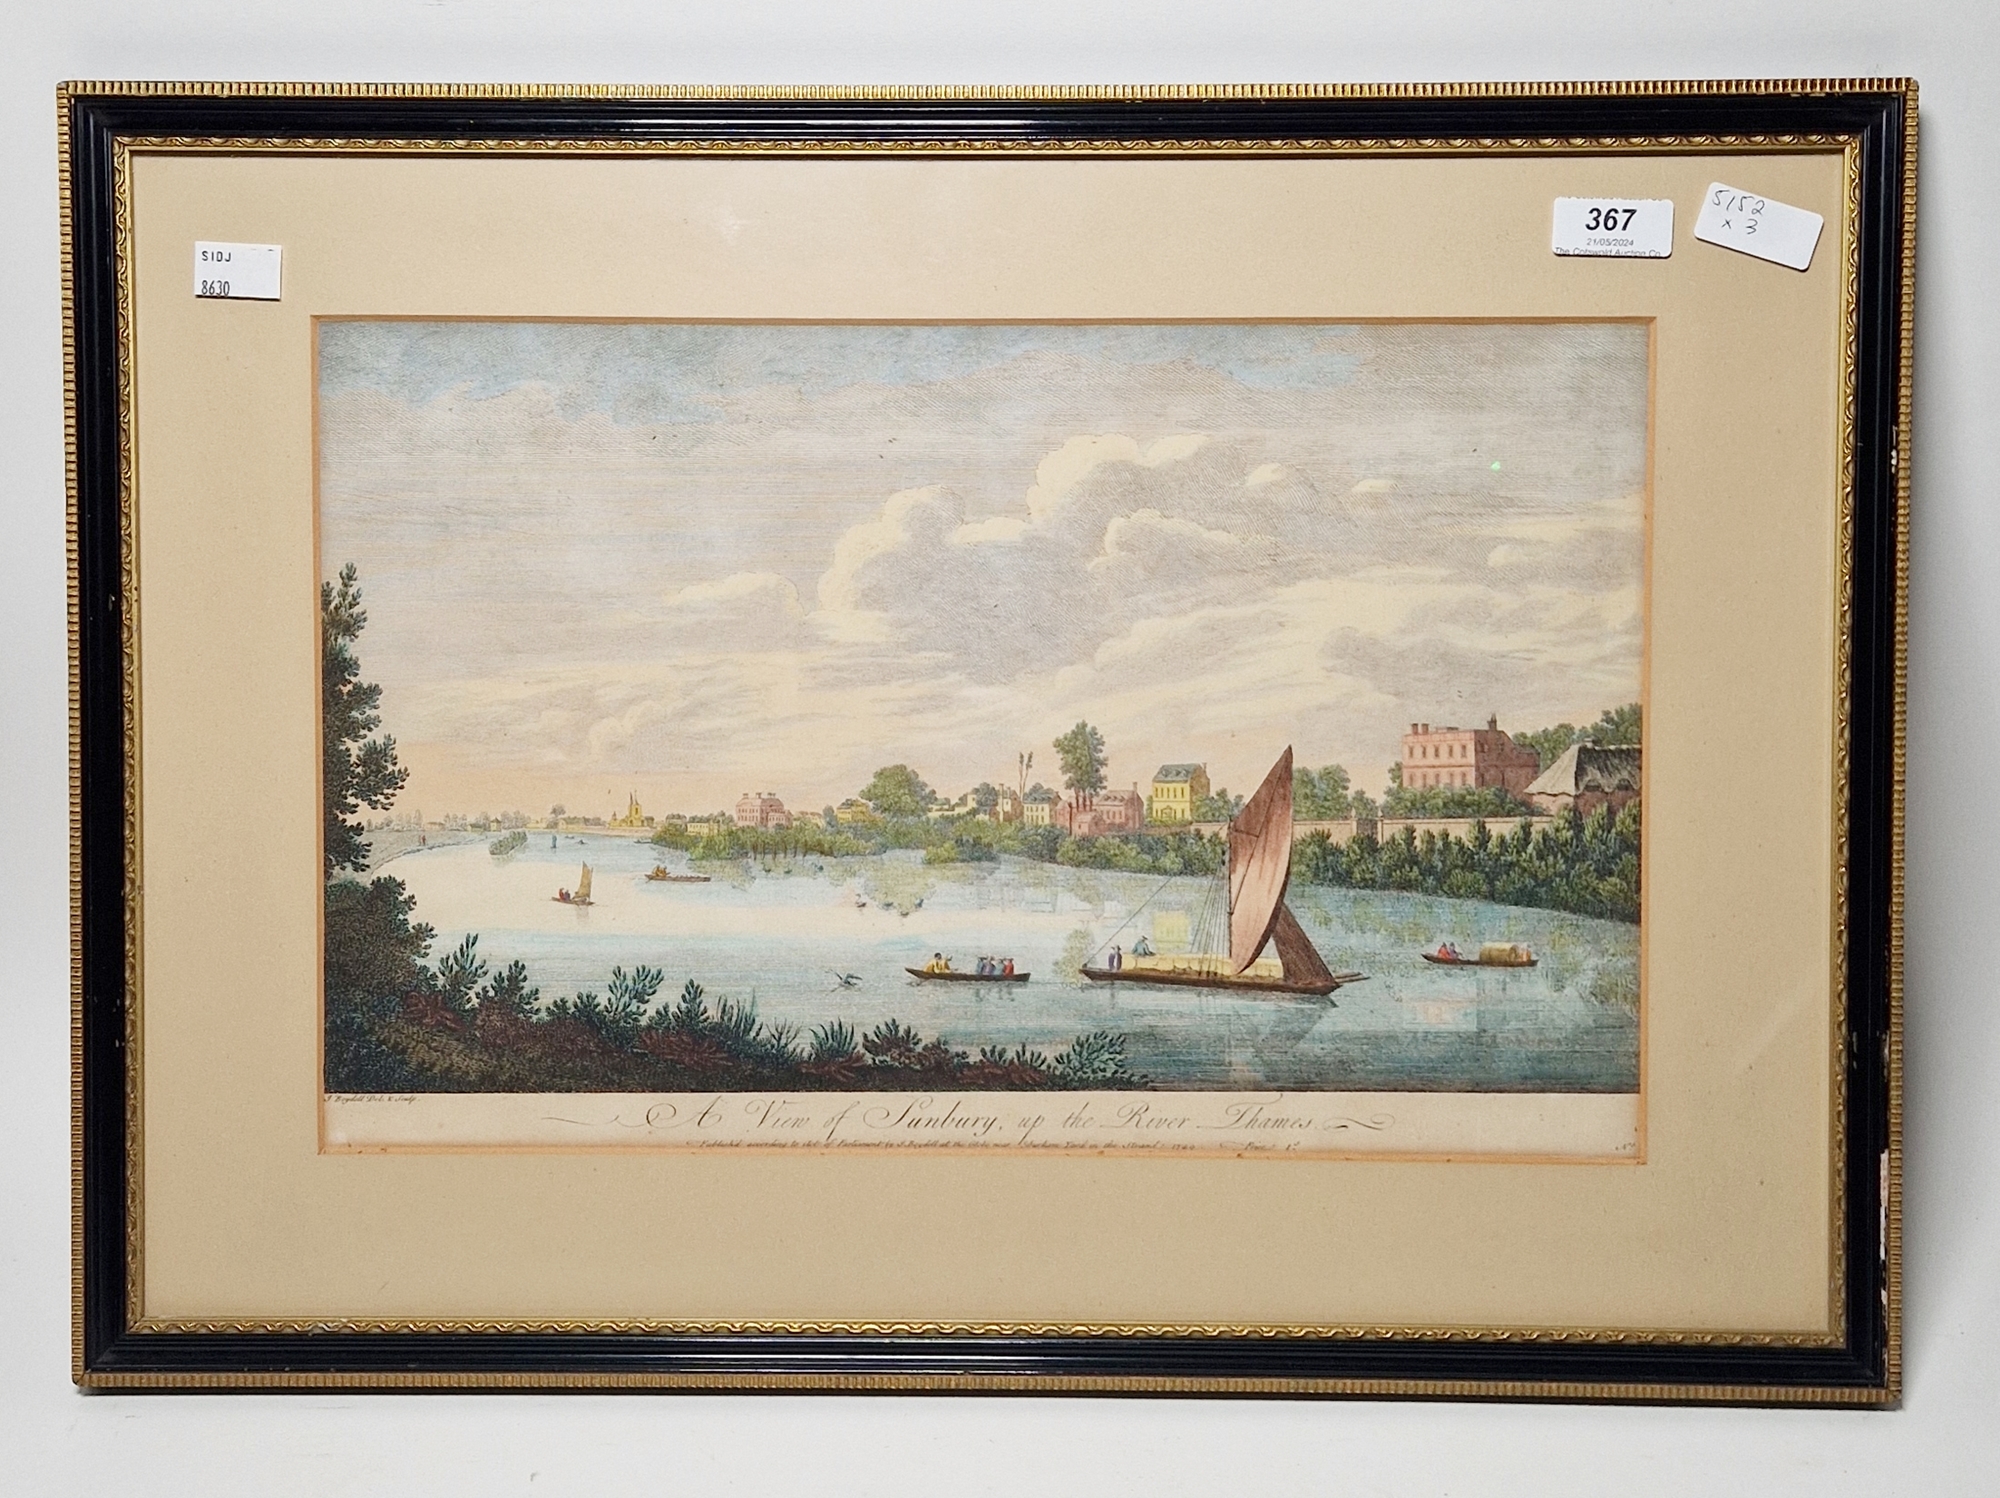 J Boydell Handcoloured engraving  "View of Shepperton", depicting horses and figures by the river, - Image 4 of 4